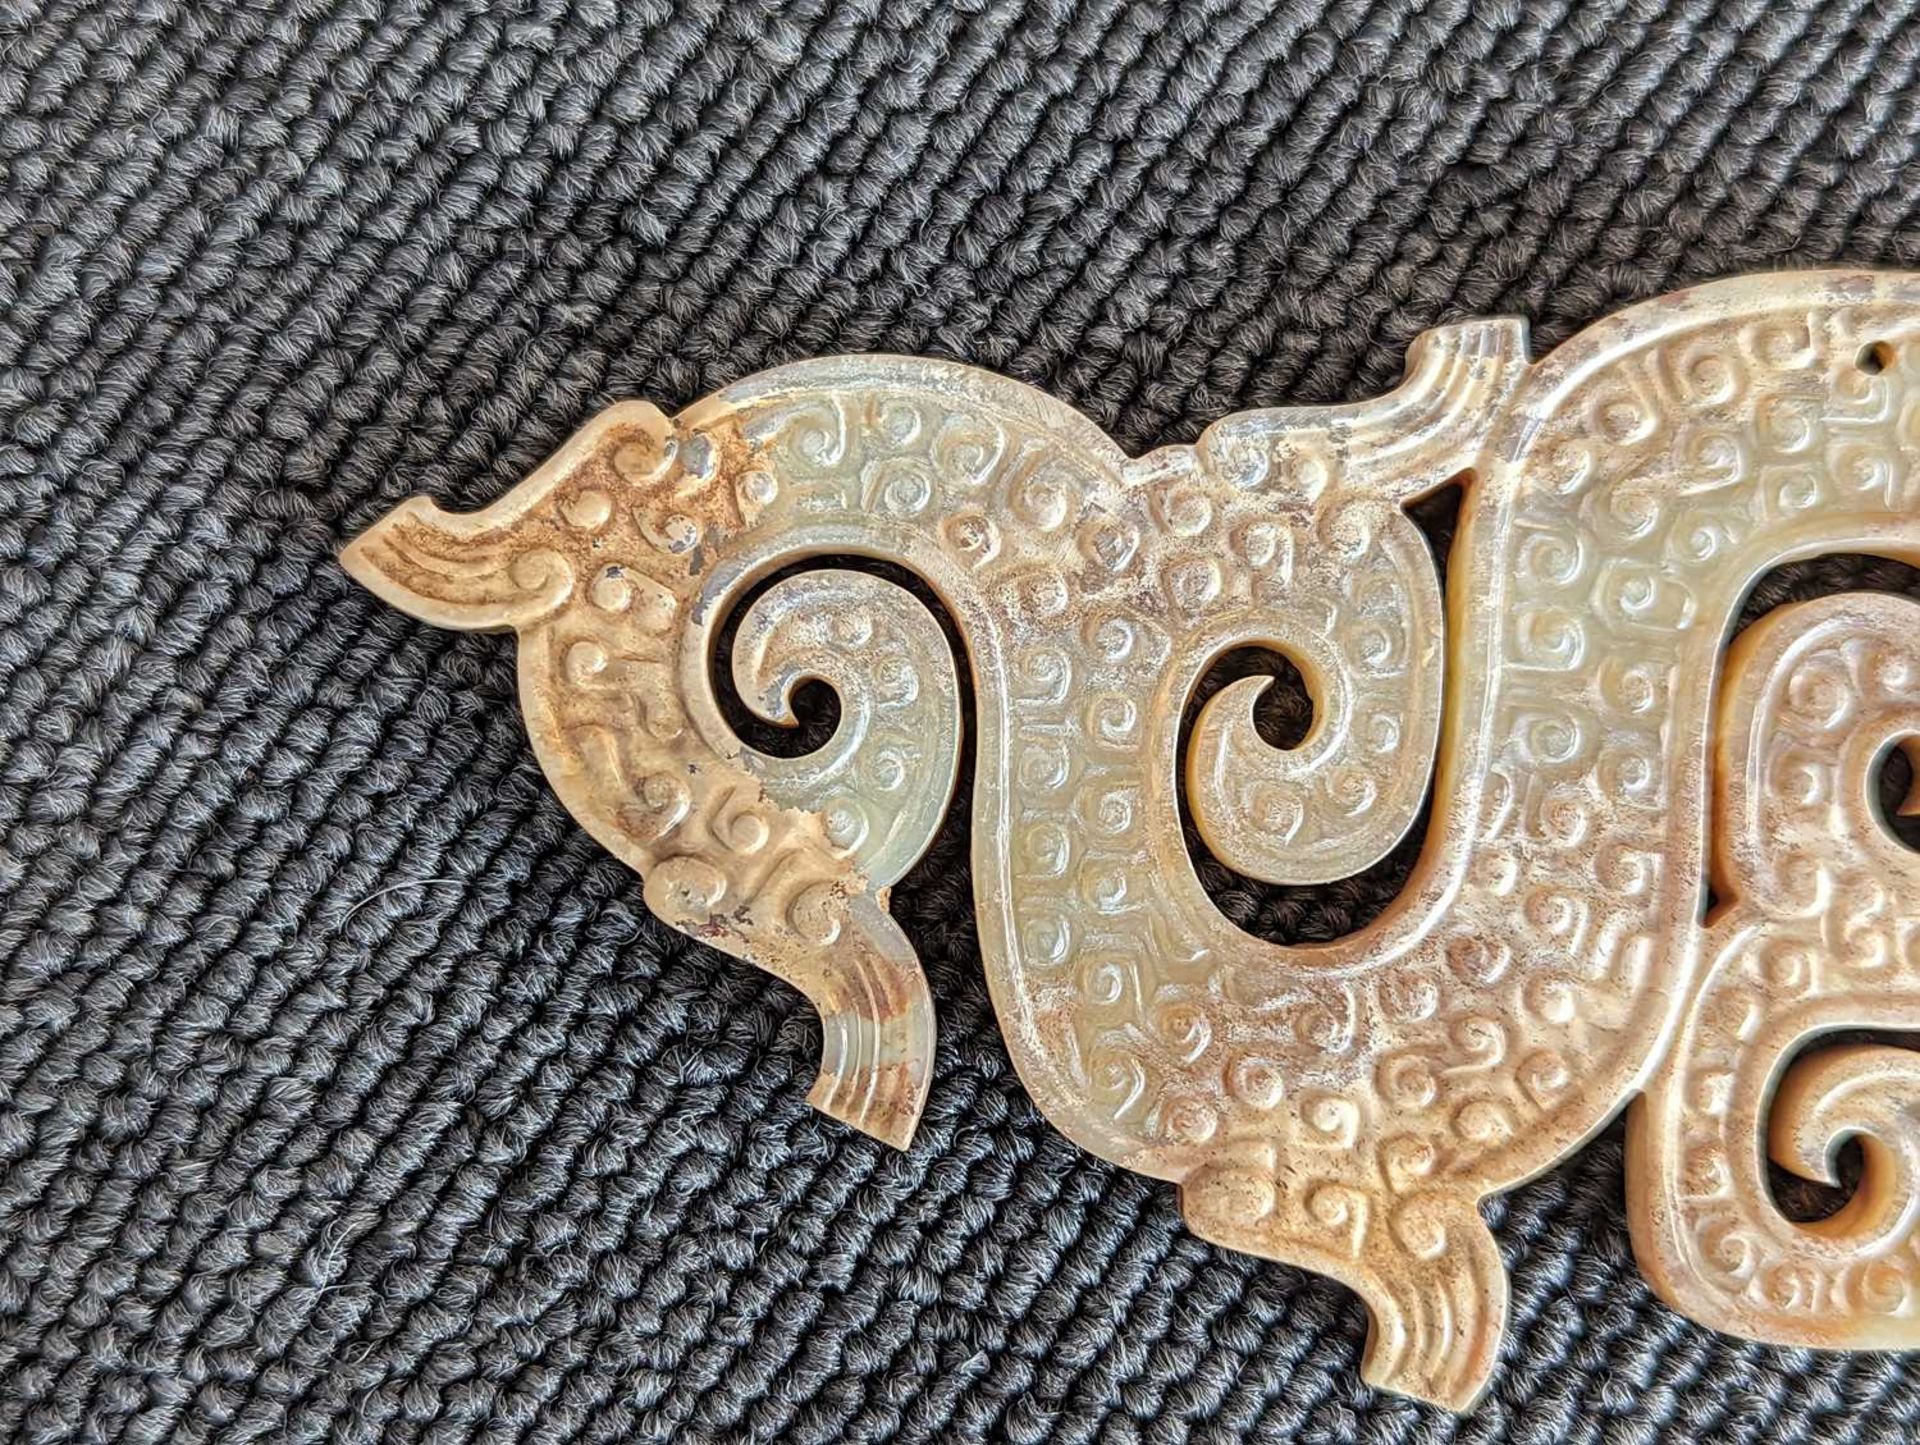 DRAGON-SHAPED PENDANT WITH CIRRUS CLOUD STRIPES - Image 7 of 25